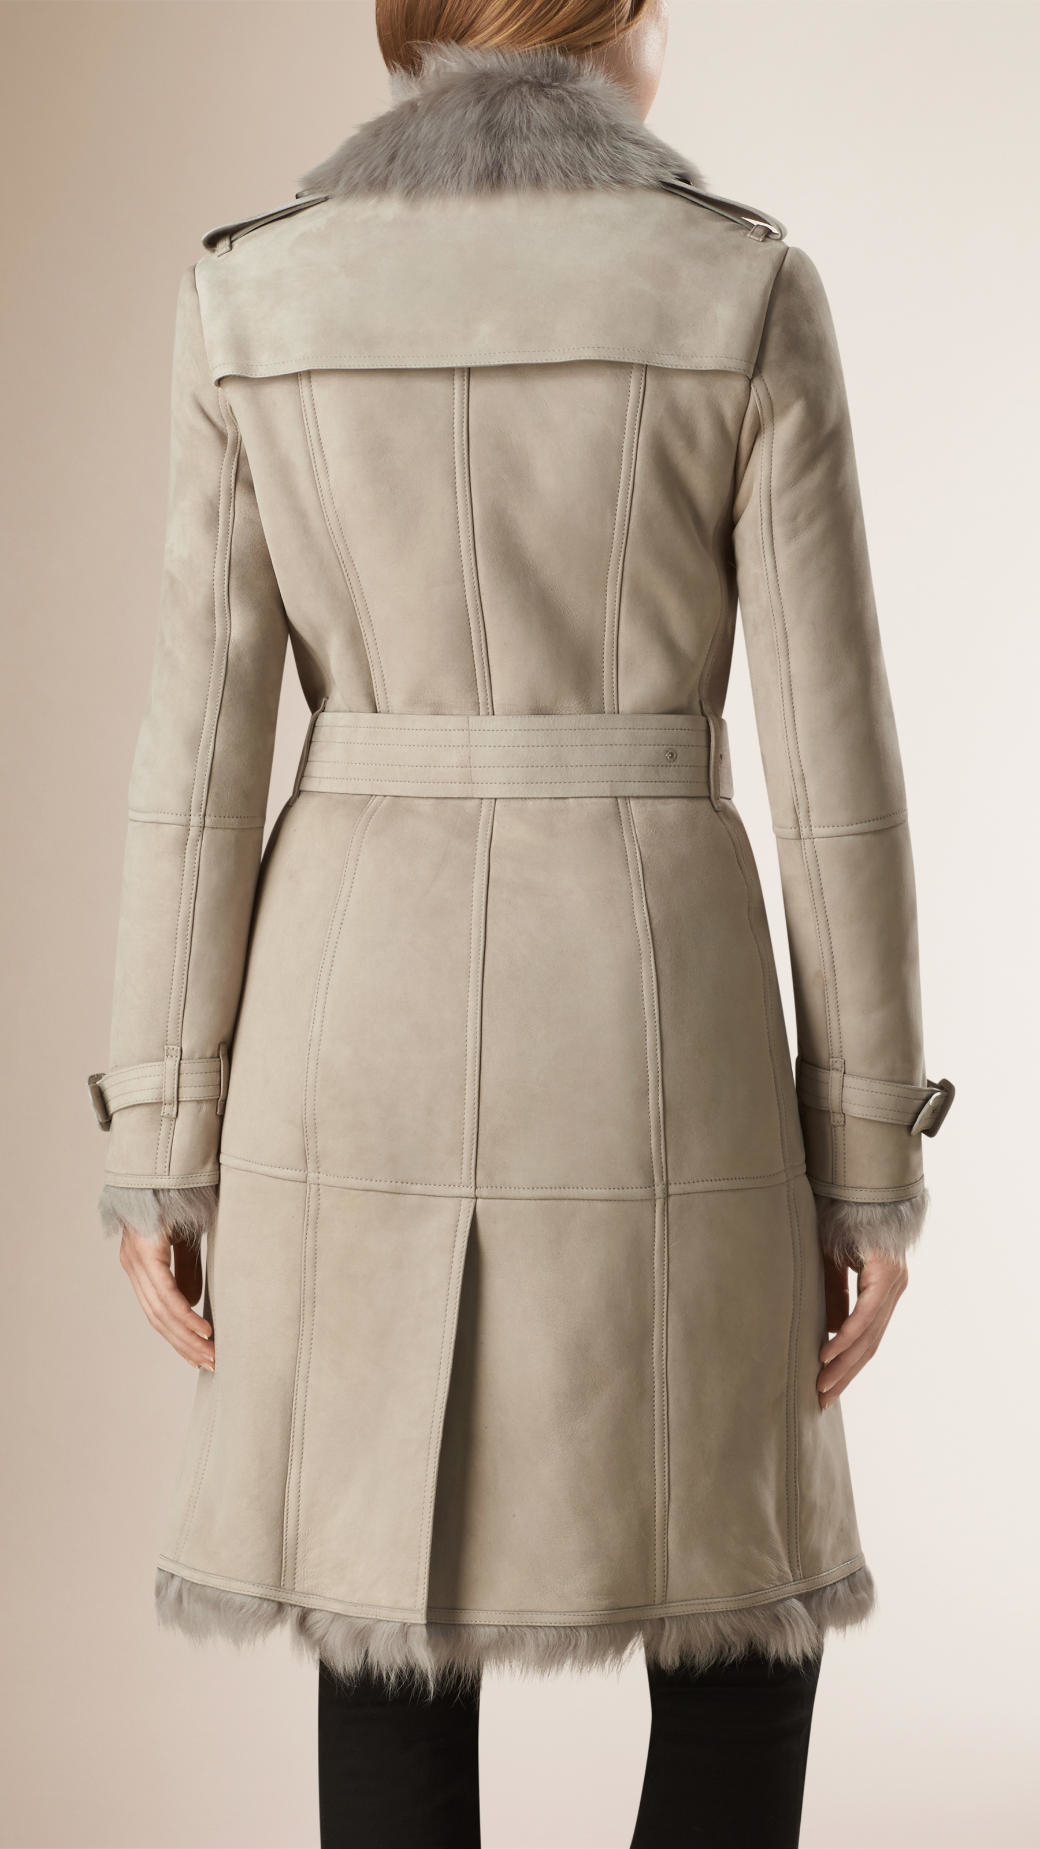 Lyst - Burberry Shearling Trench Coat in Gray